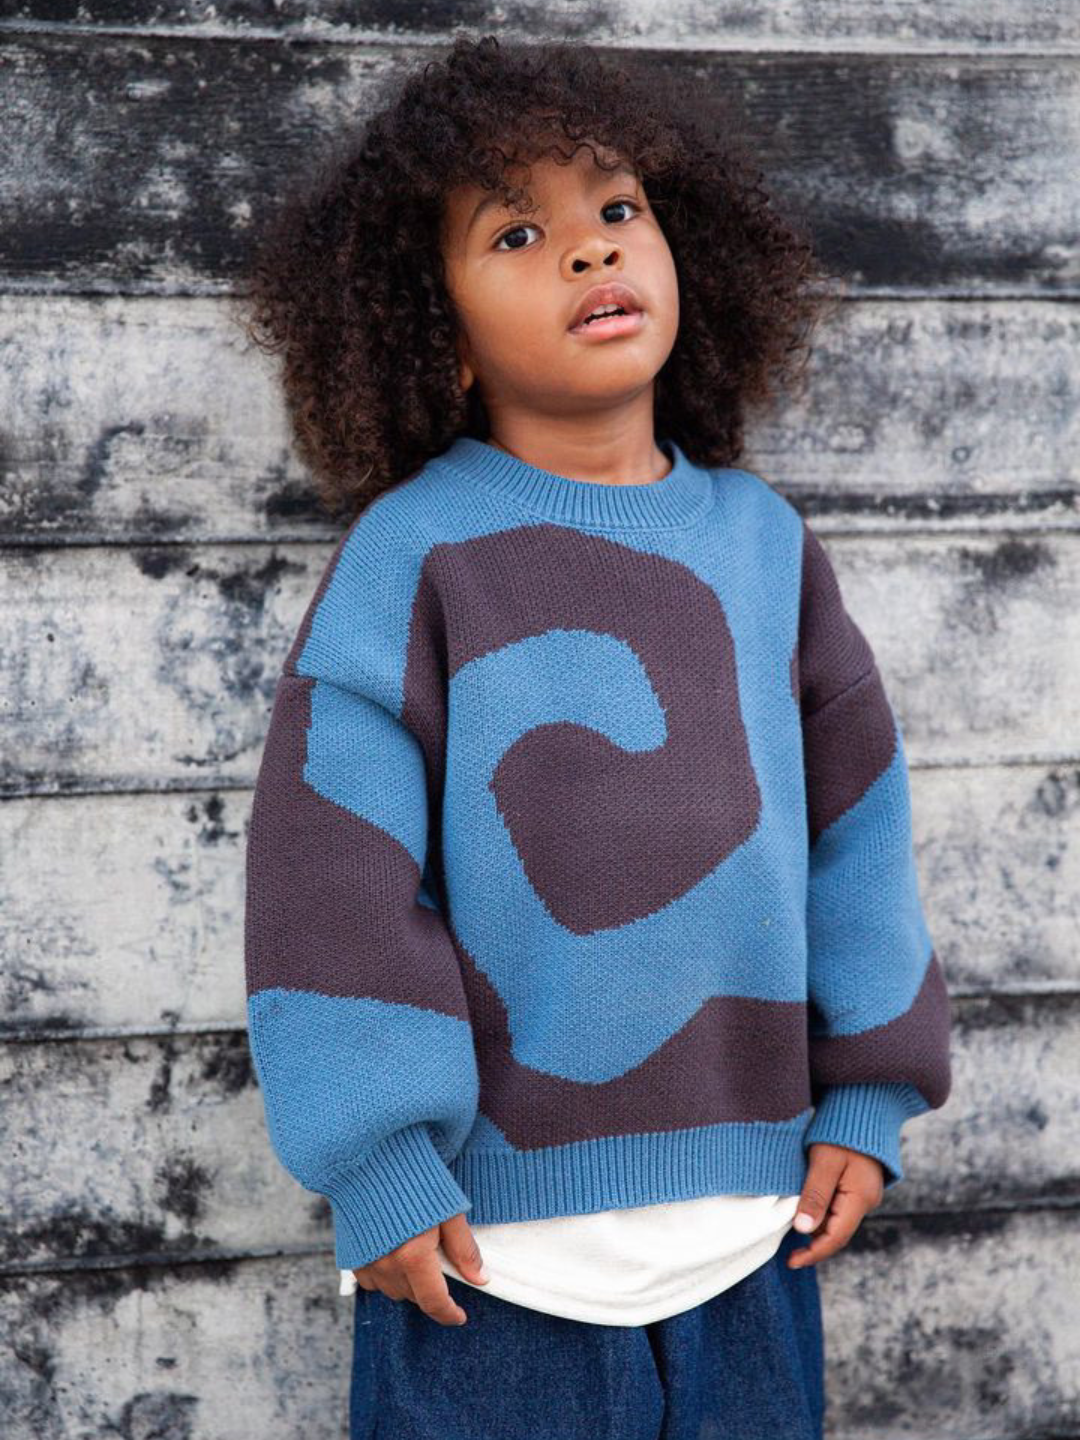 A child wearing a kids crewneck sweater in medium blue, with a large single charcoal grey swirl design that covers the entire sweater. He is standing against a grey wooden wall and also wears dark blue baggy jeans.